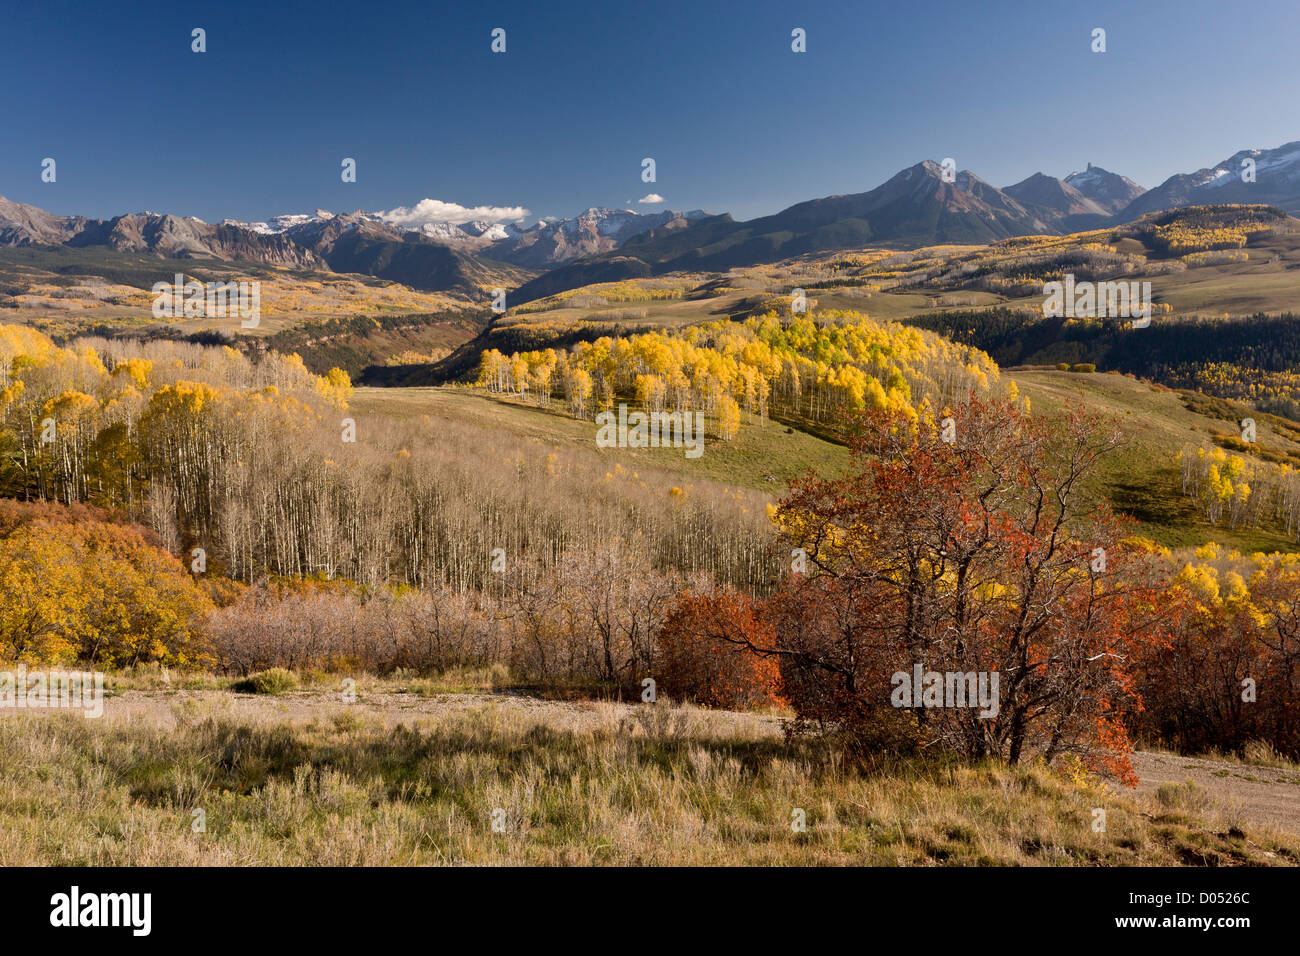 Aspen forests and pasture in autumn, on Wilson Mesa with the high San Juan mountains beyond. Colorado, USA Stock Photo